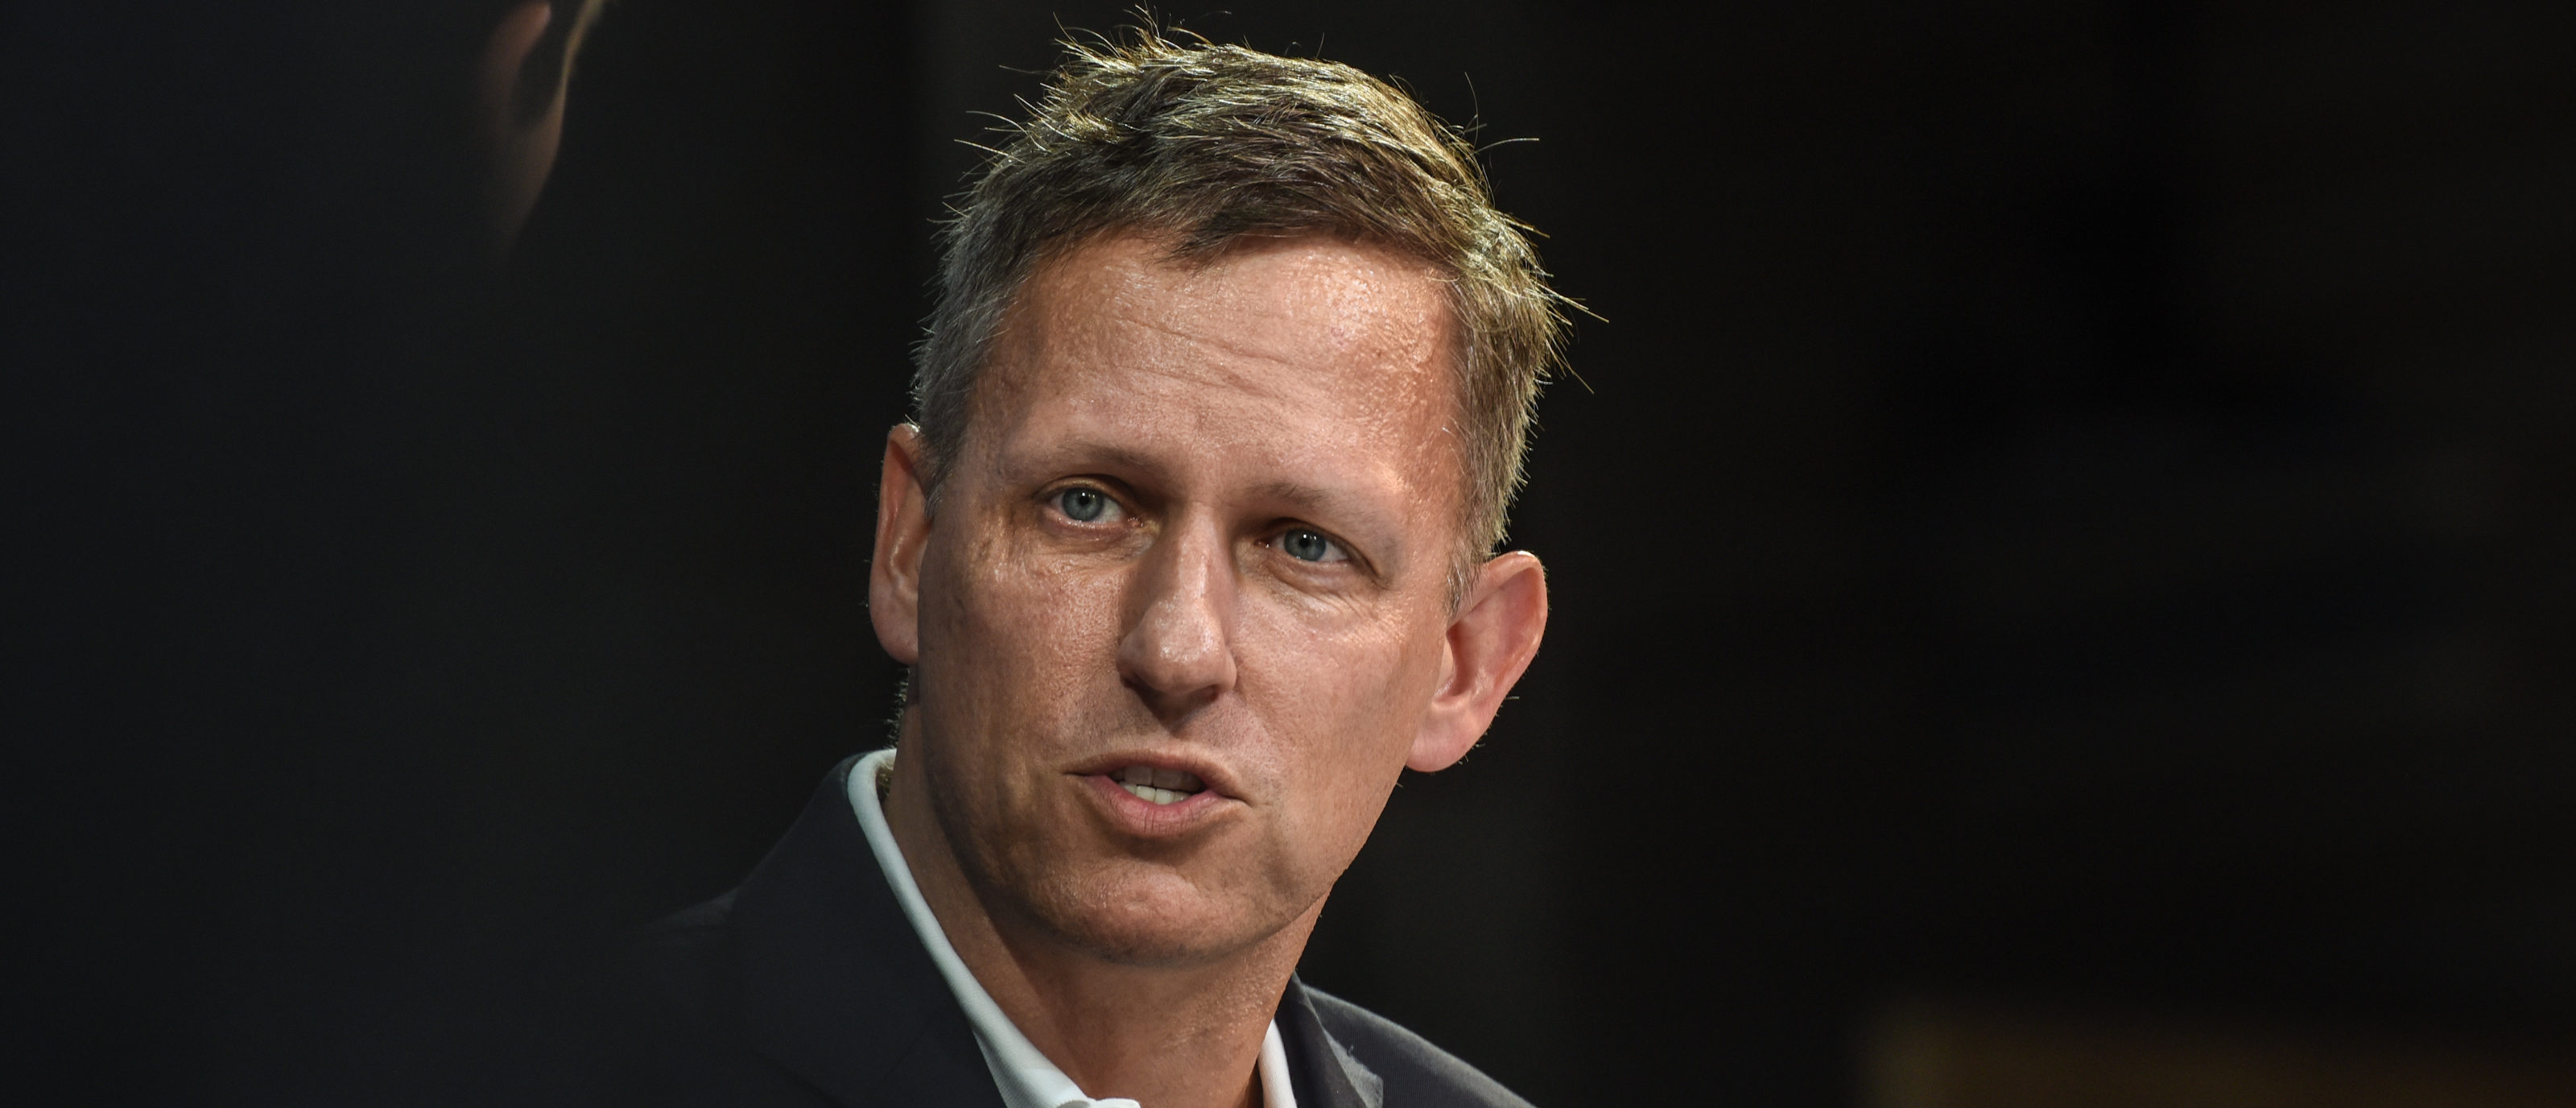 NEW YORK, NY - NOVEMBER 01: Peter Thiel, Partner, Founders Fund, speaks at the New York Times DealBook conference on November 1, 2018 in New York City. (Photo by Stephanie Keith/Getty Images)